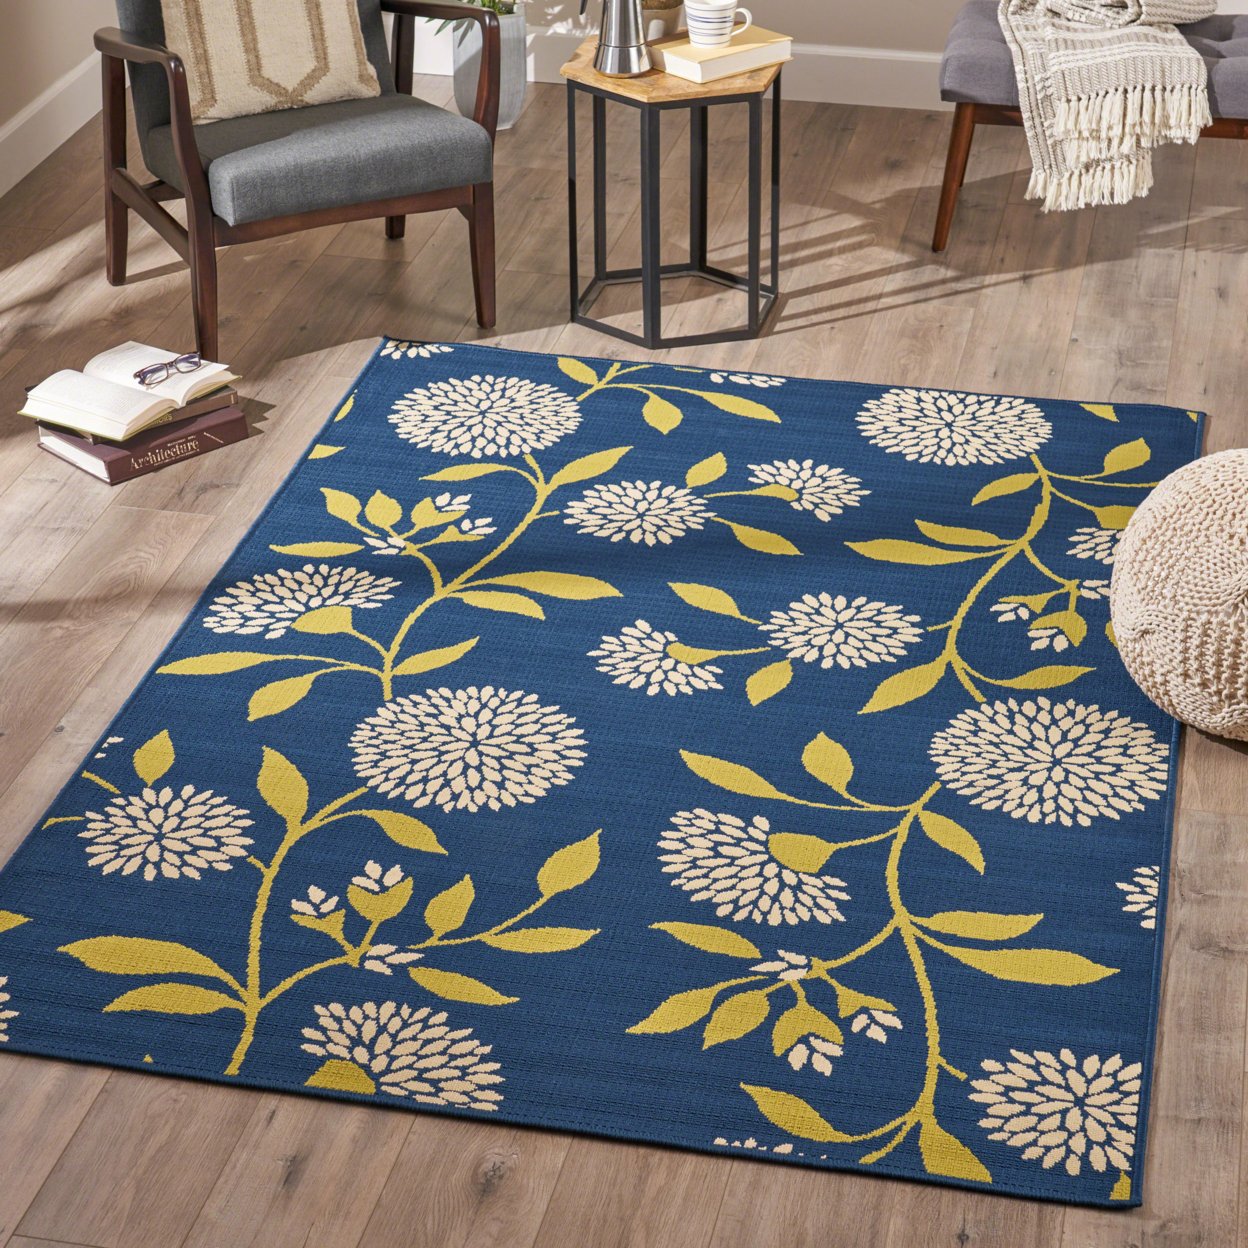 Max Indoor Floral Area Rug, Blue And Green - Blue + Green, 5' X 8'